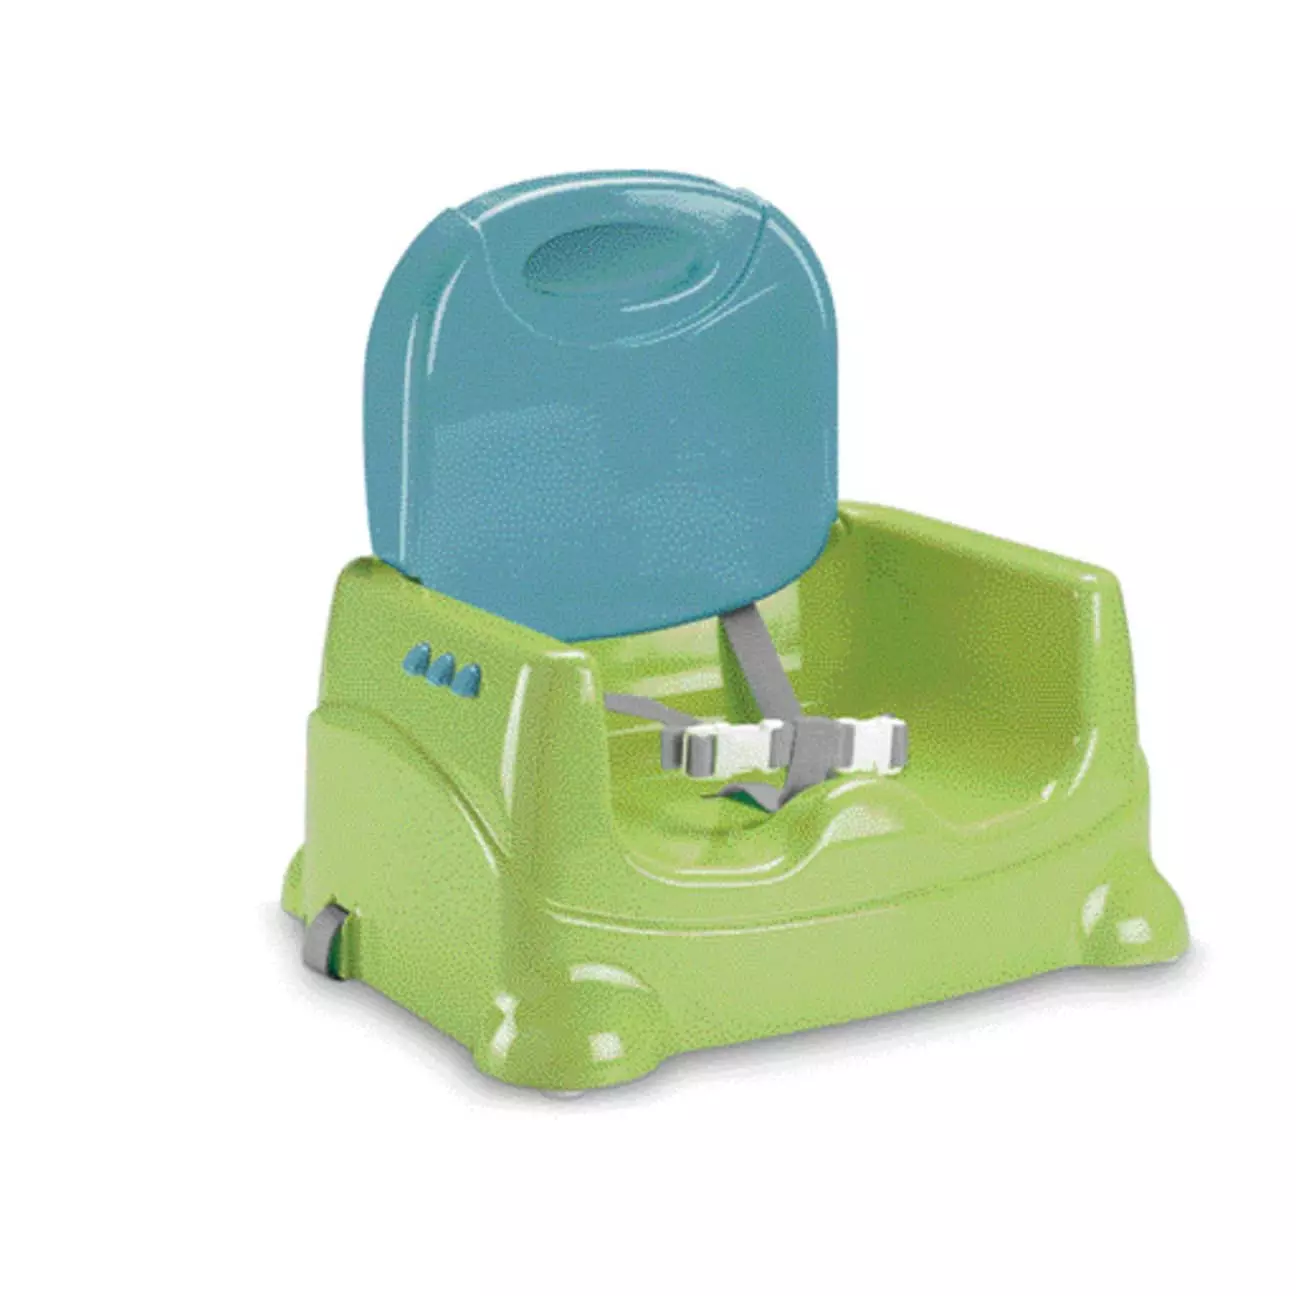 https://www.momjunction.com/wp-content/uploads/product-images/fisher-price-healthy-care-booster-seat_afl3435.jpg.webp